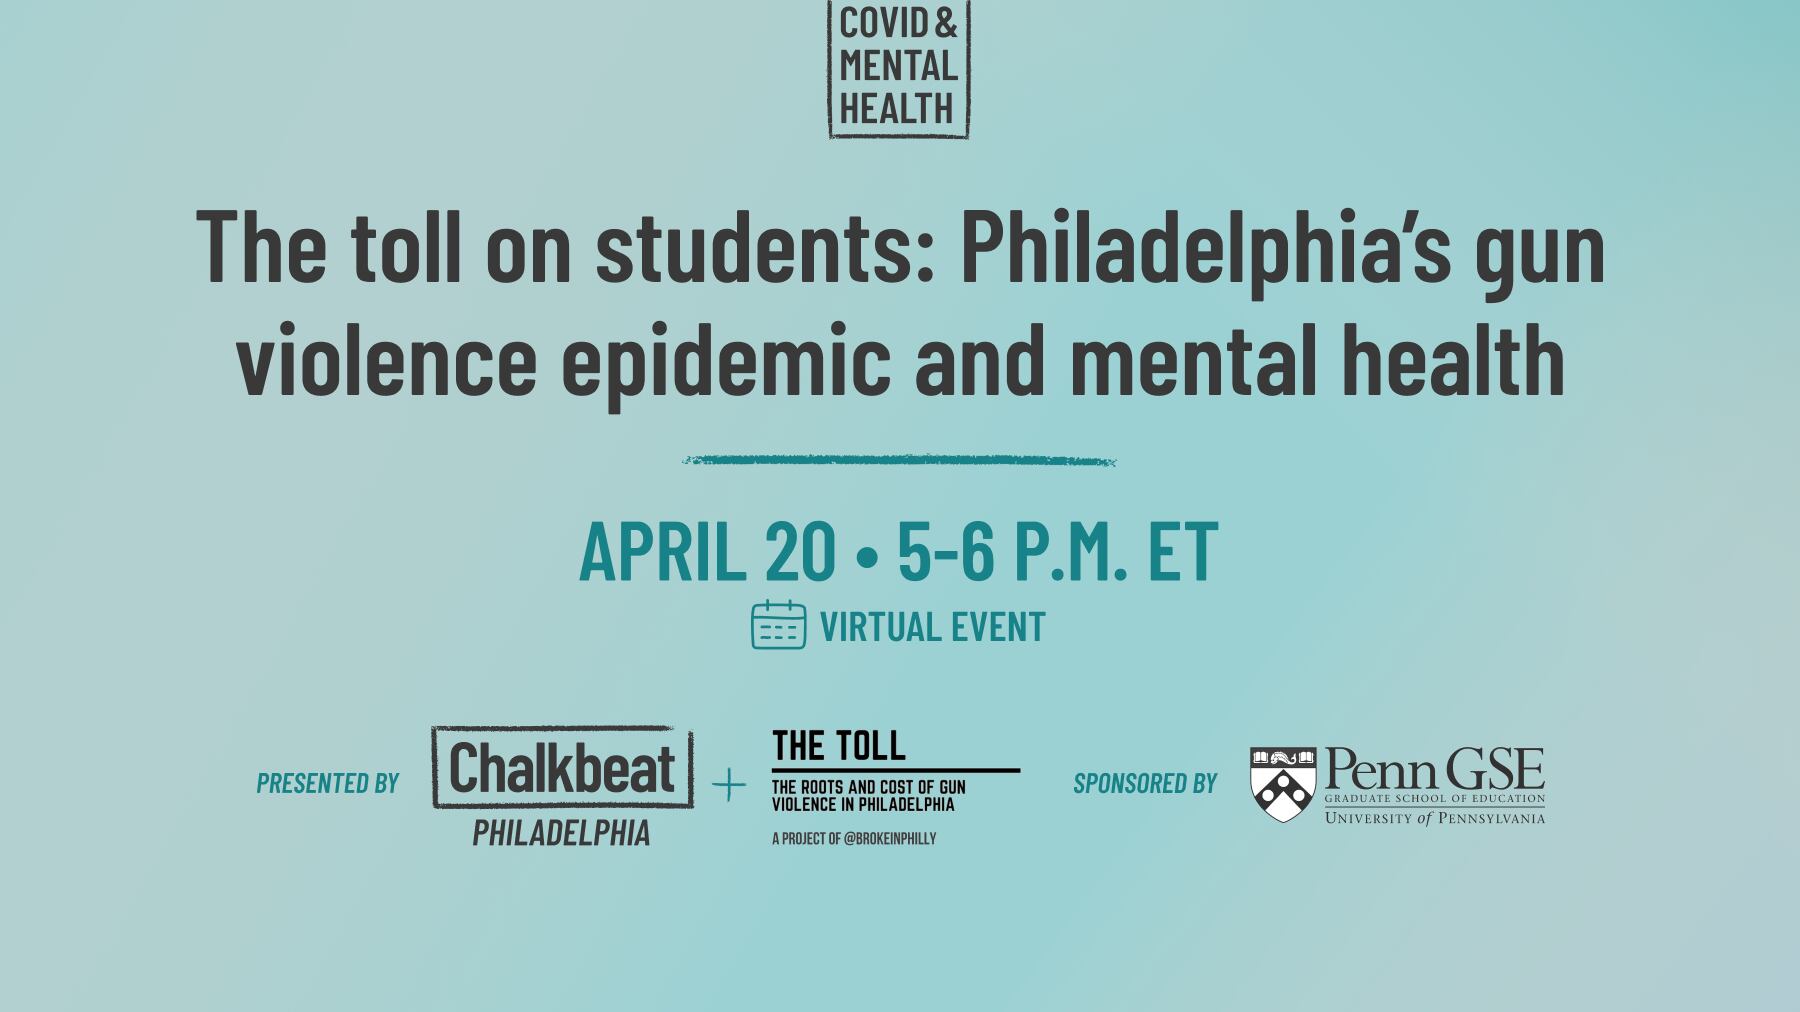 An event promotional image with the title “The toll on students:&nbsp;Philadelphia’s gun violence epidemic and mental health” against a light blue background. 